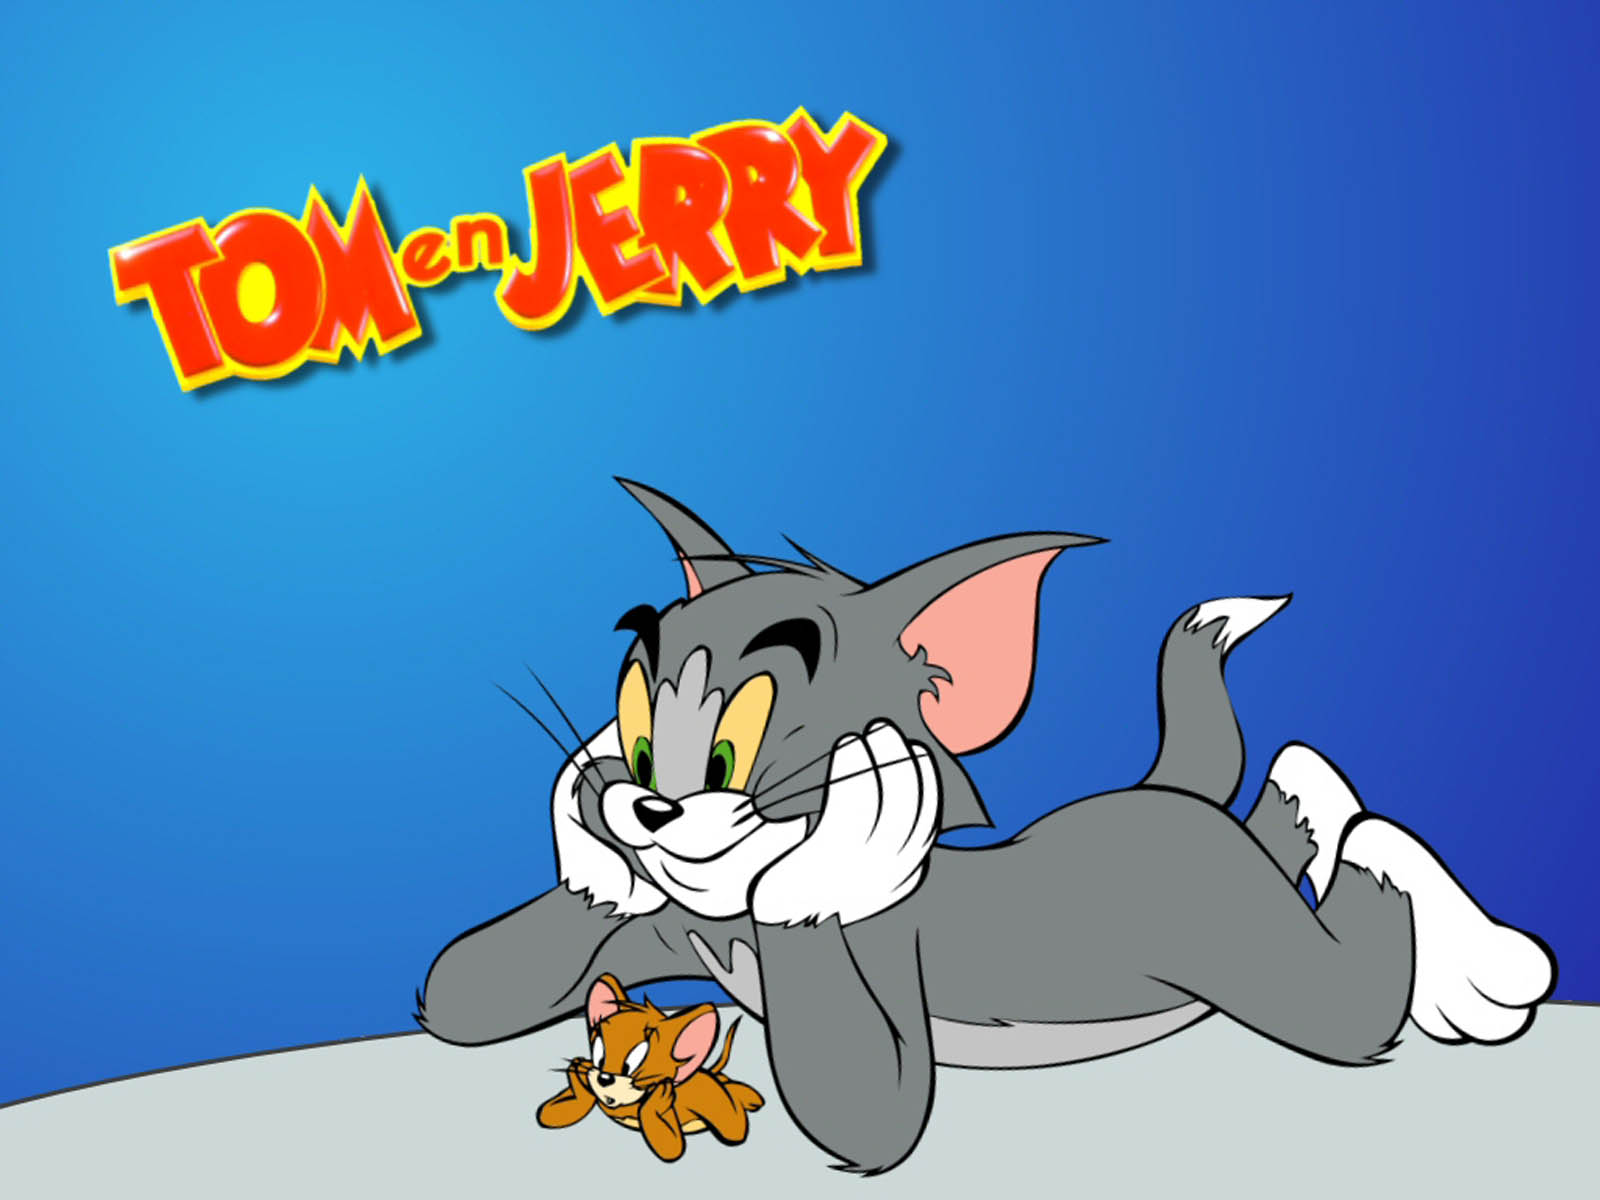 Tom and Jerry Wallpapers curious buddies